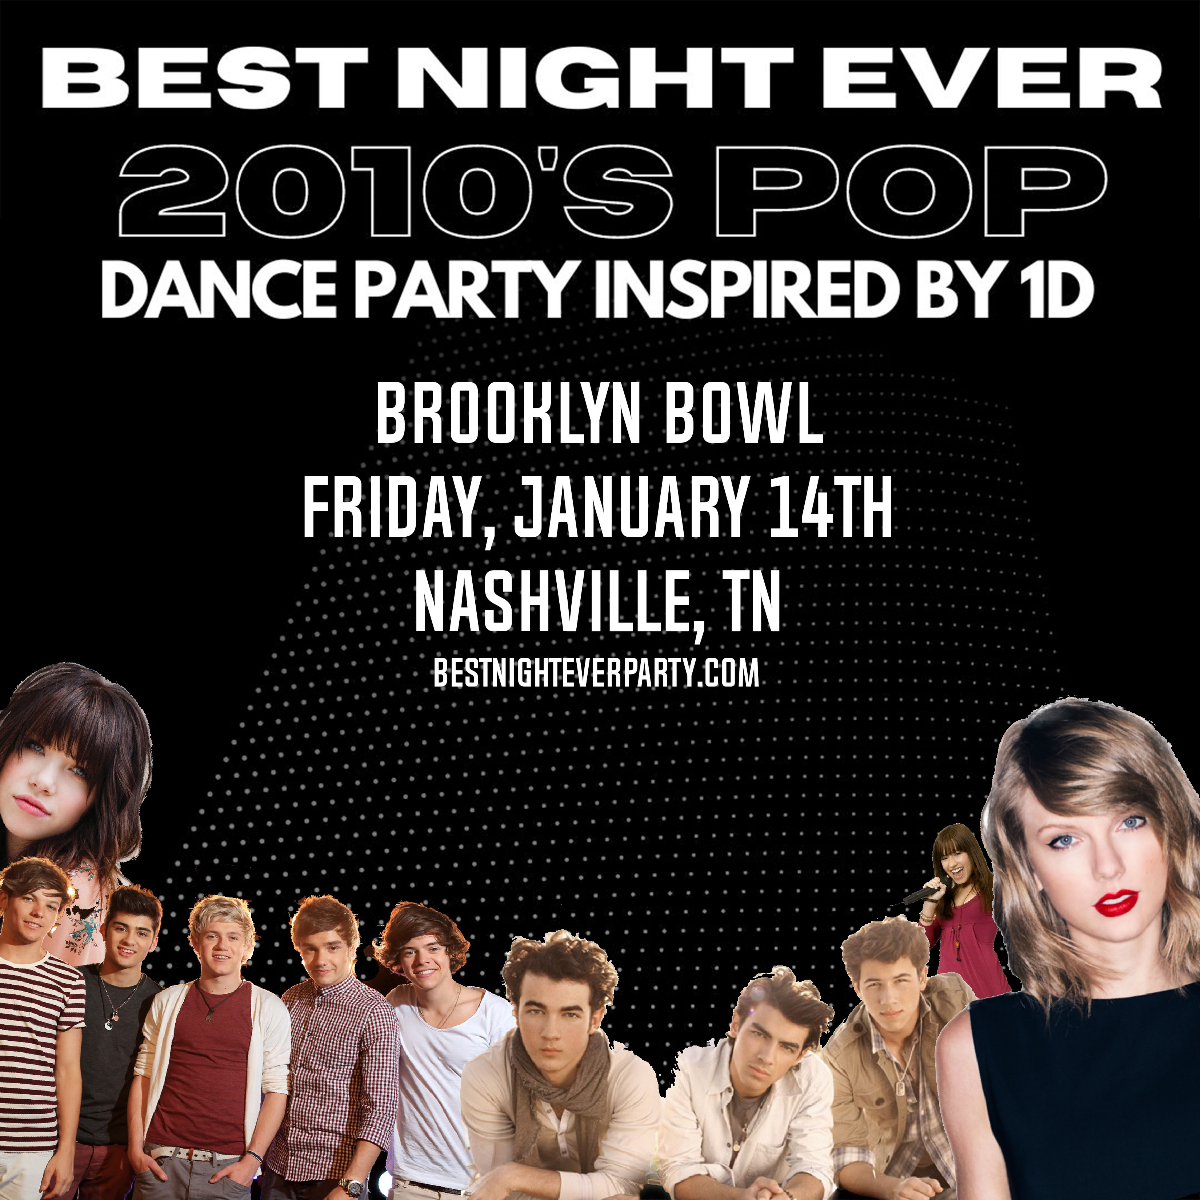 Best Night Ever: 2010's Pop Dance Party inspired by 1D